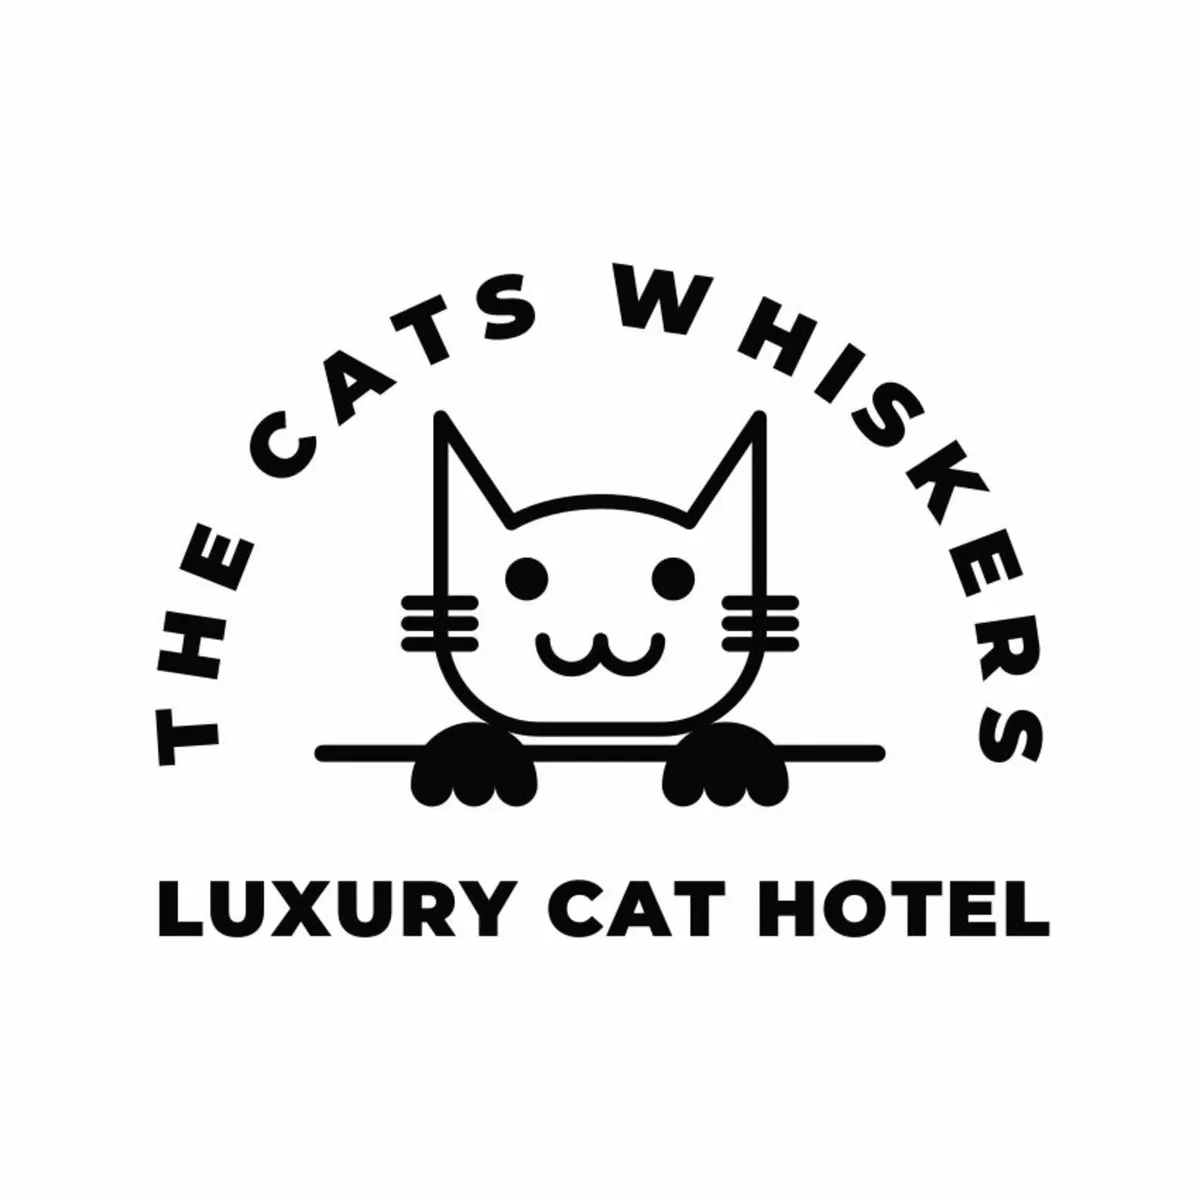 Luxury Boarding Cattery and Cat Hotel - Image 1